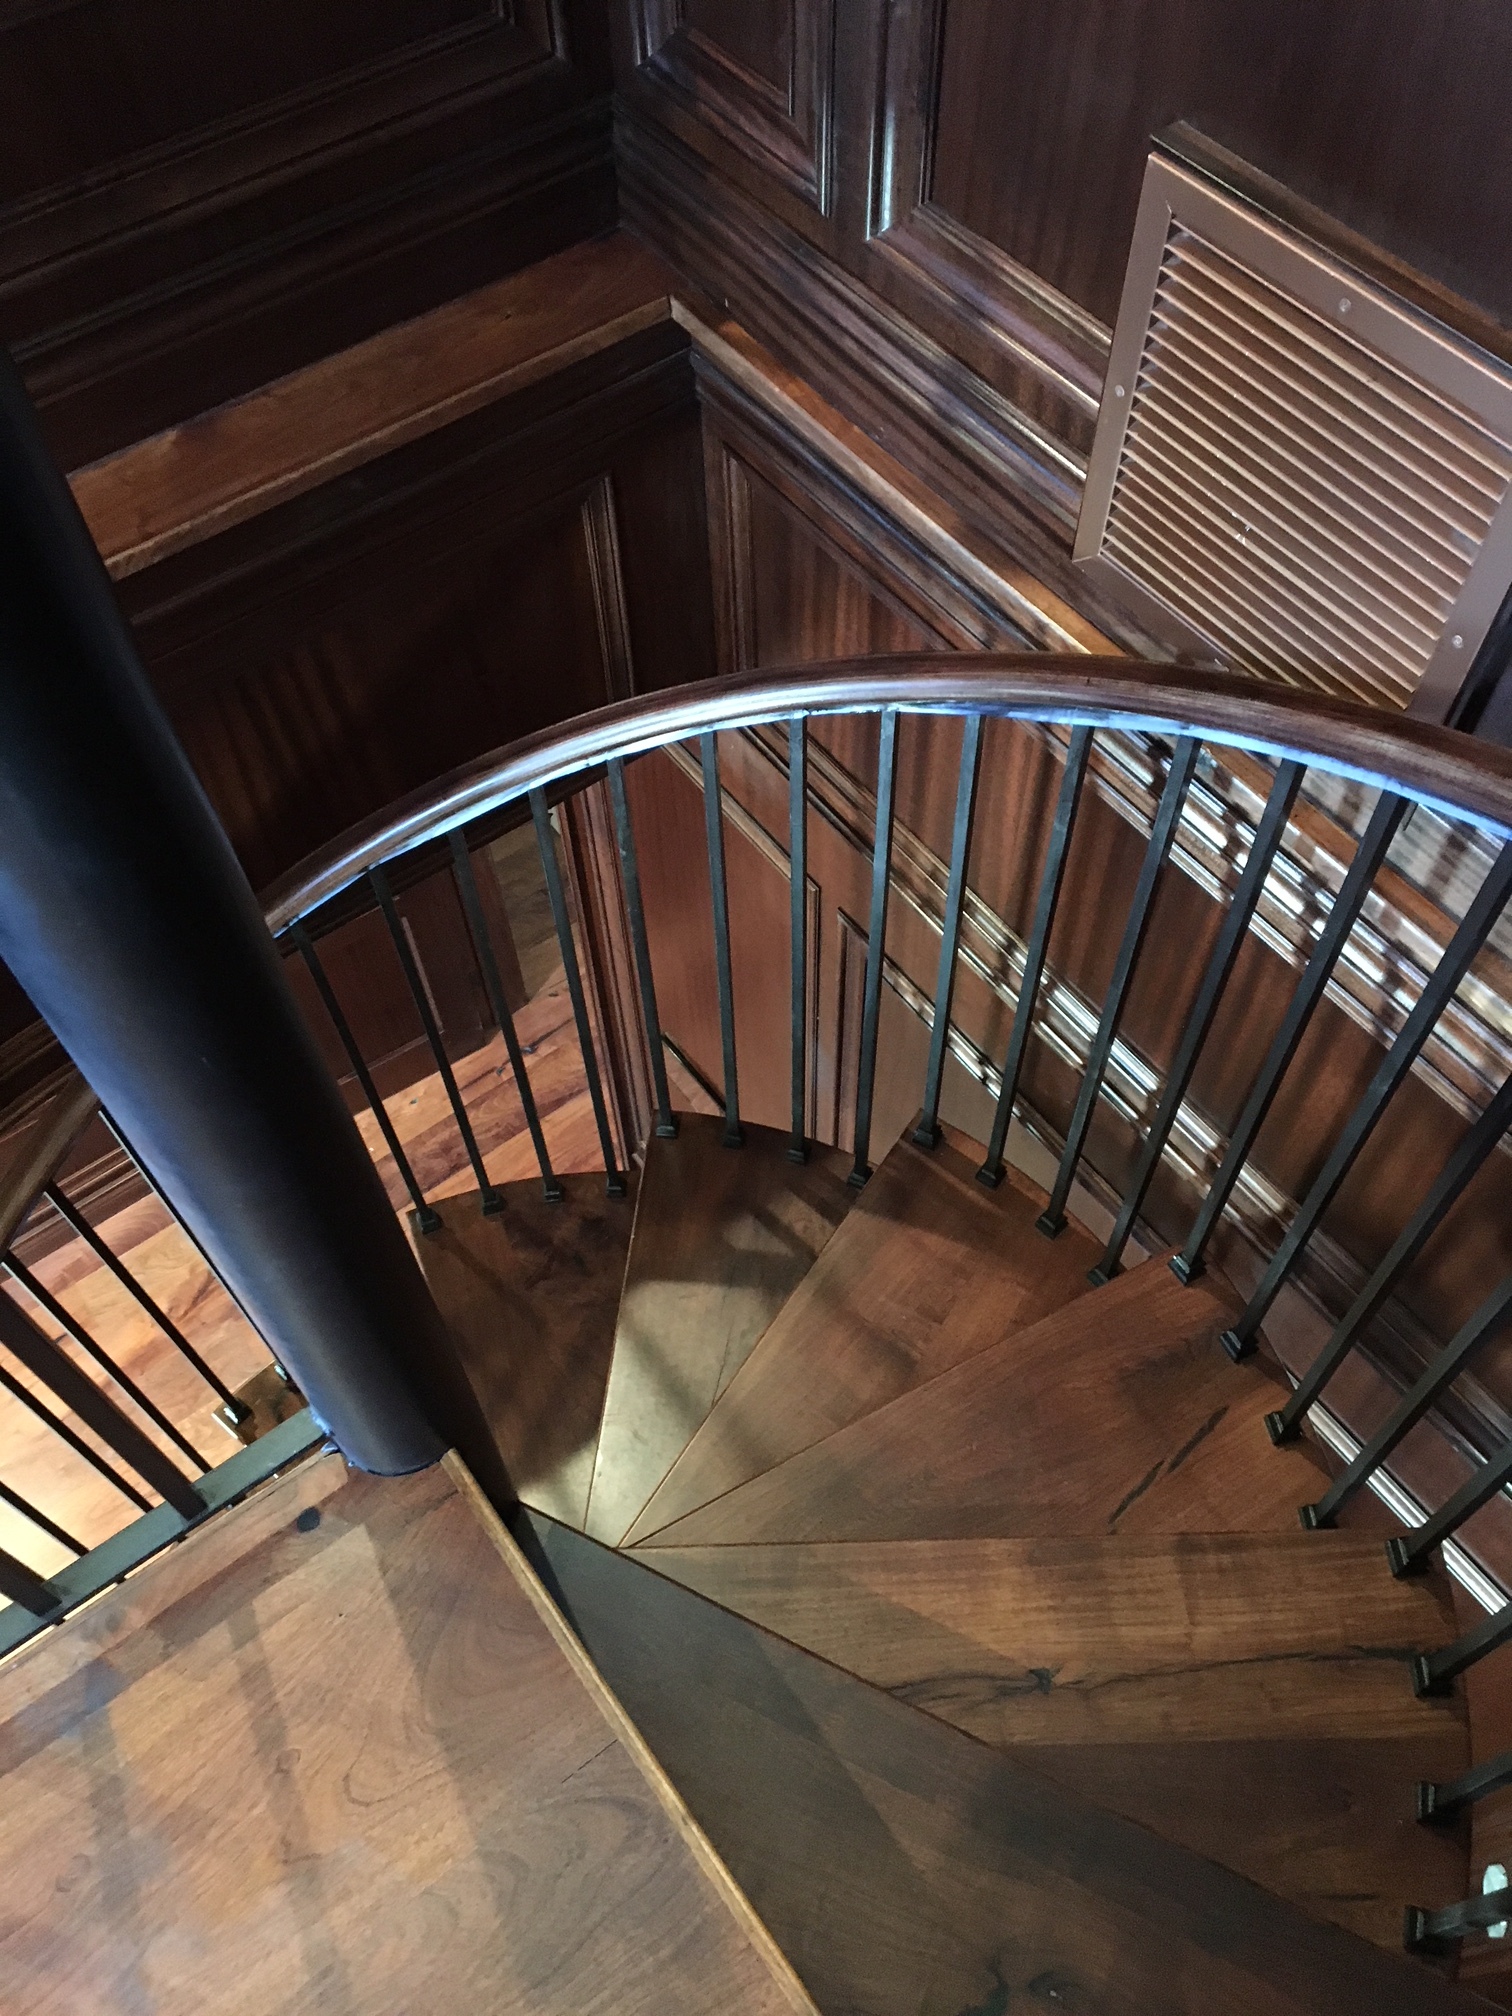 Mesquite Spiral Stairs located in Dripping Springs